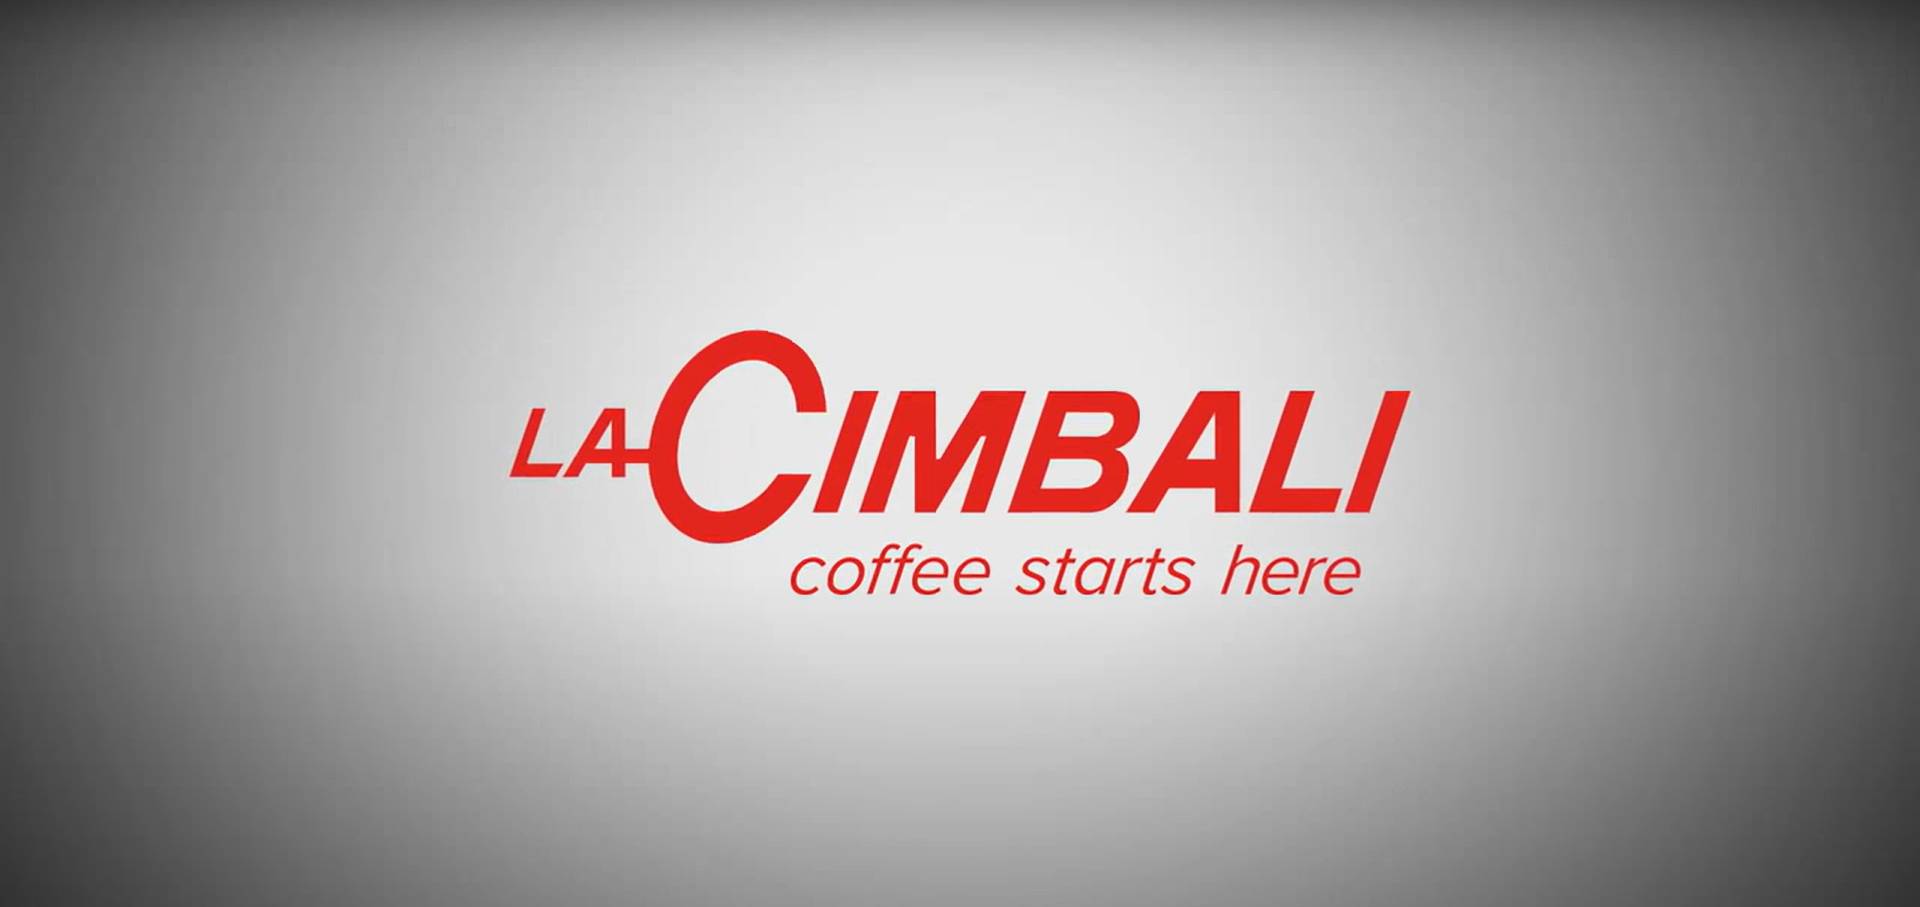 A sign that says " la cimbali coffee starts here ".